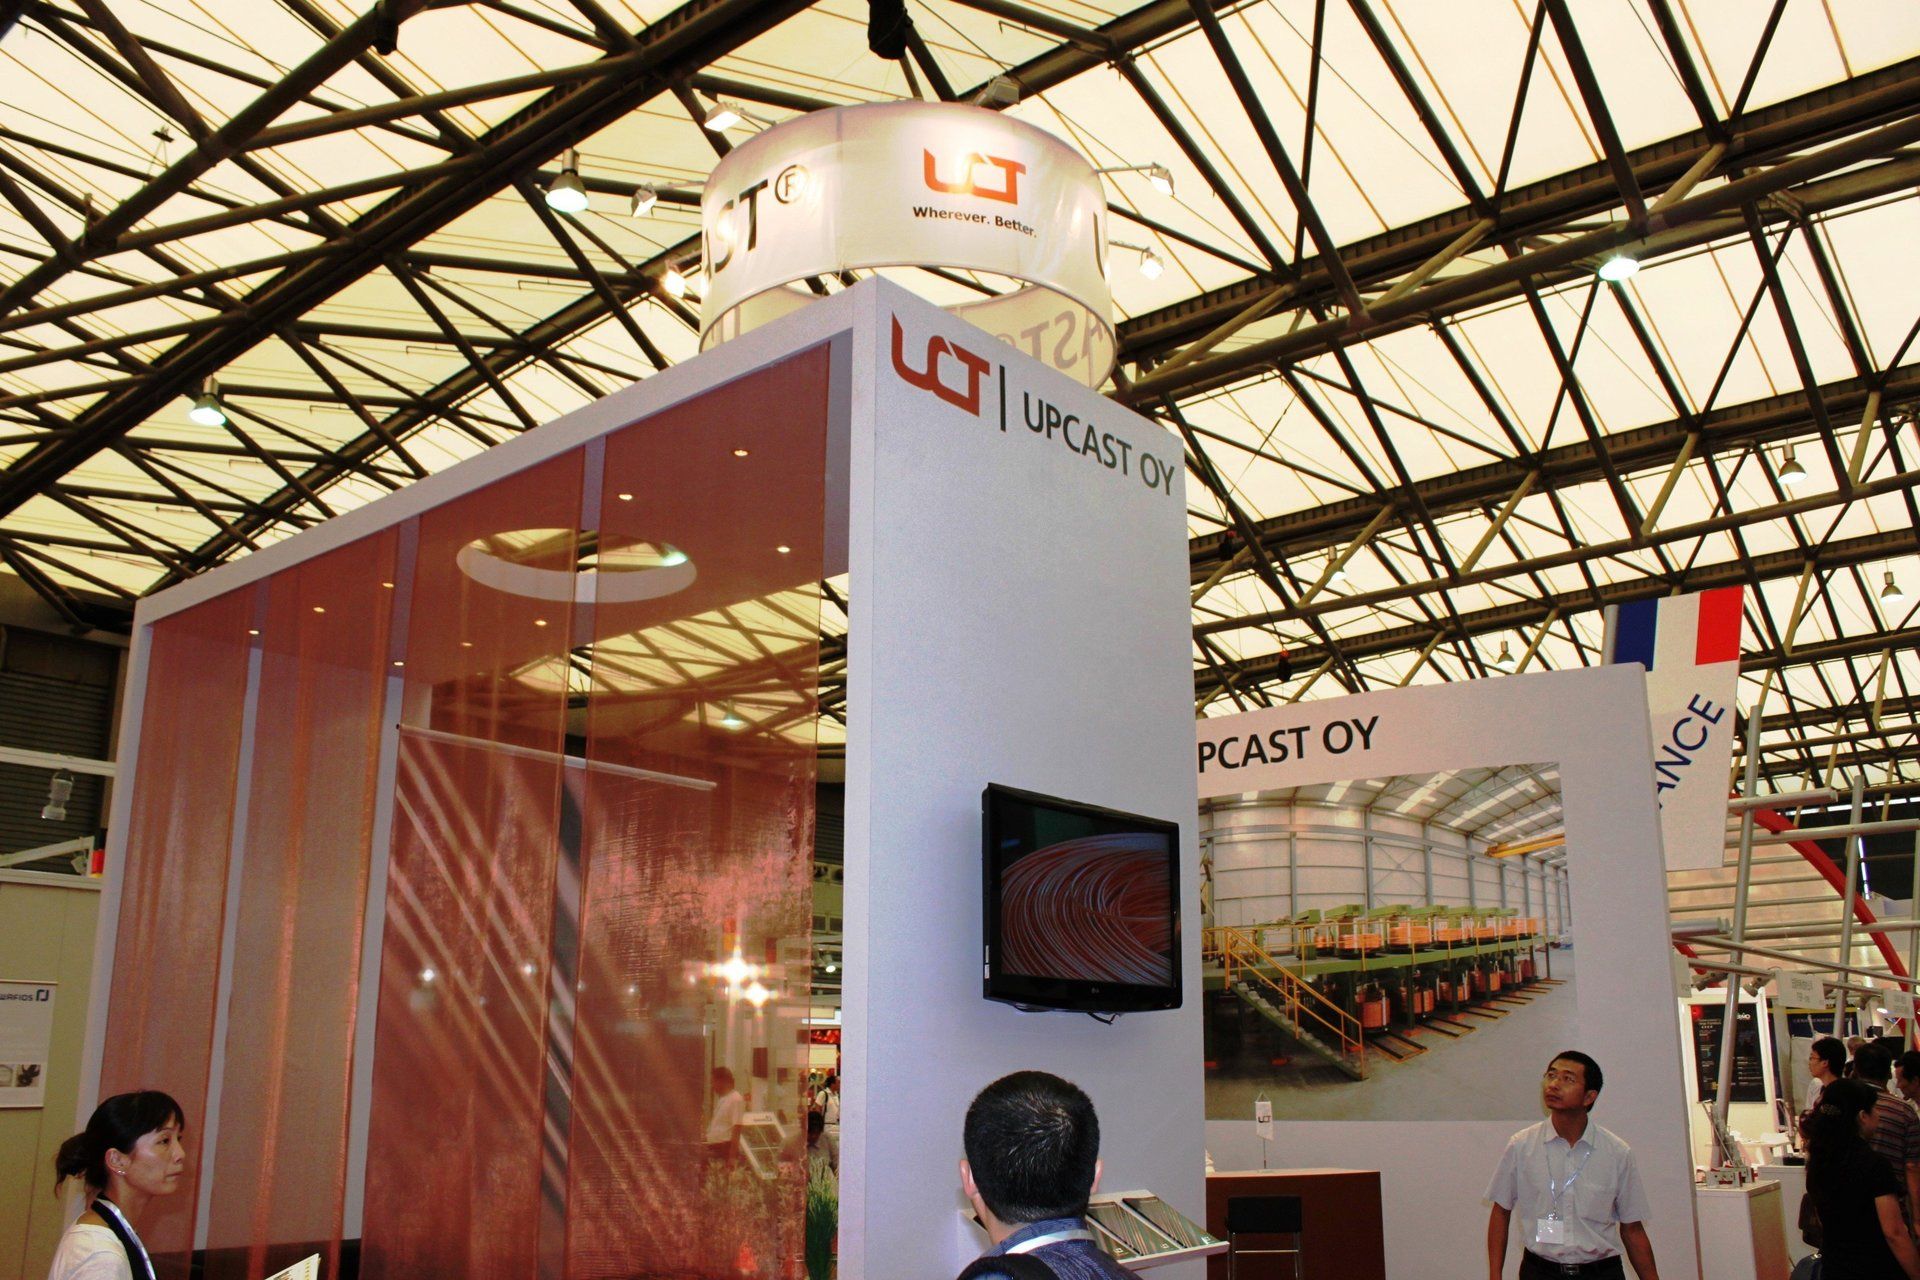 Upcast @ WIRE China 2010. Booth designed and built by Essential Global Fairs.